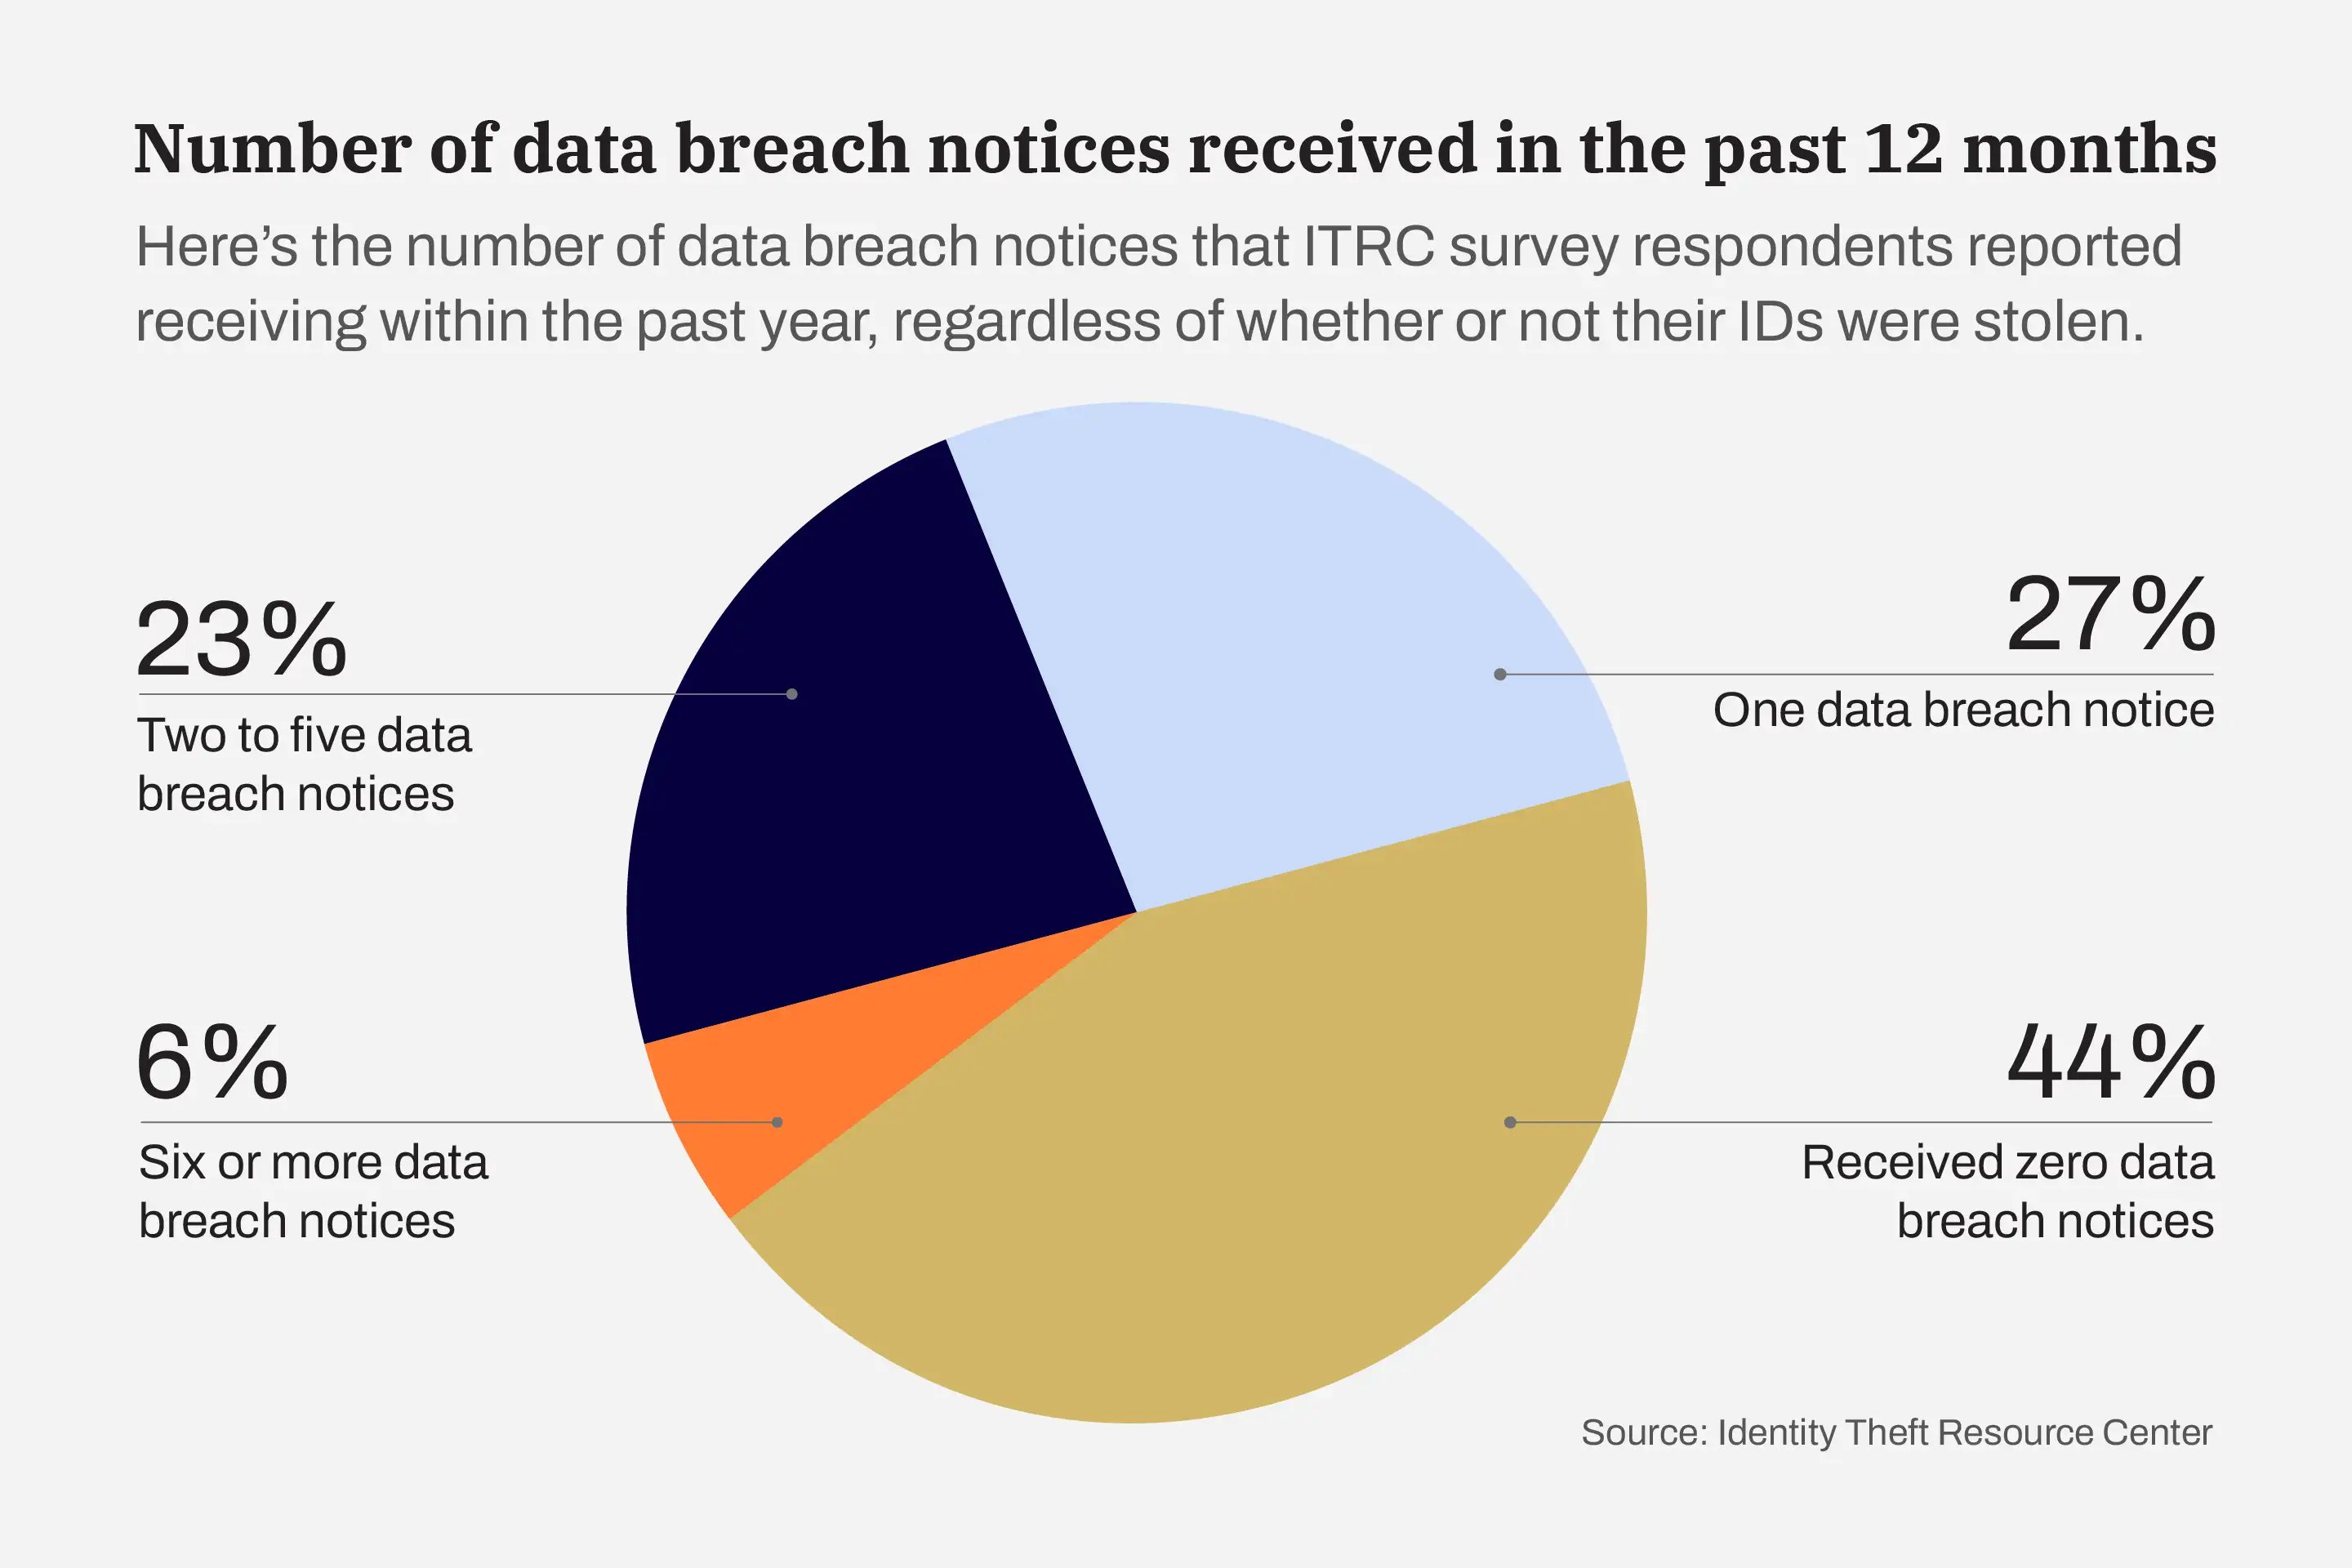 Graphic: Number of data breach notices received in the past 12 months